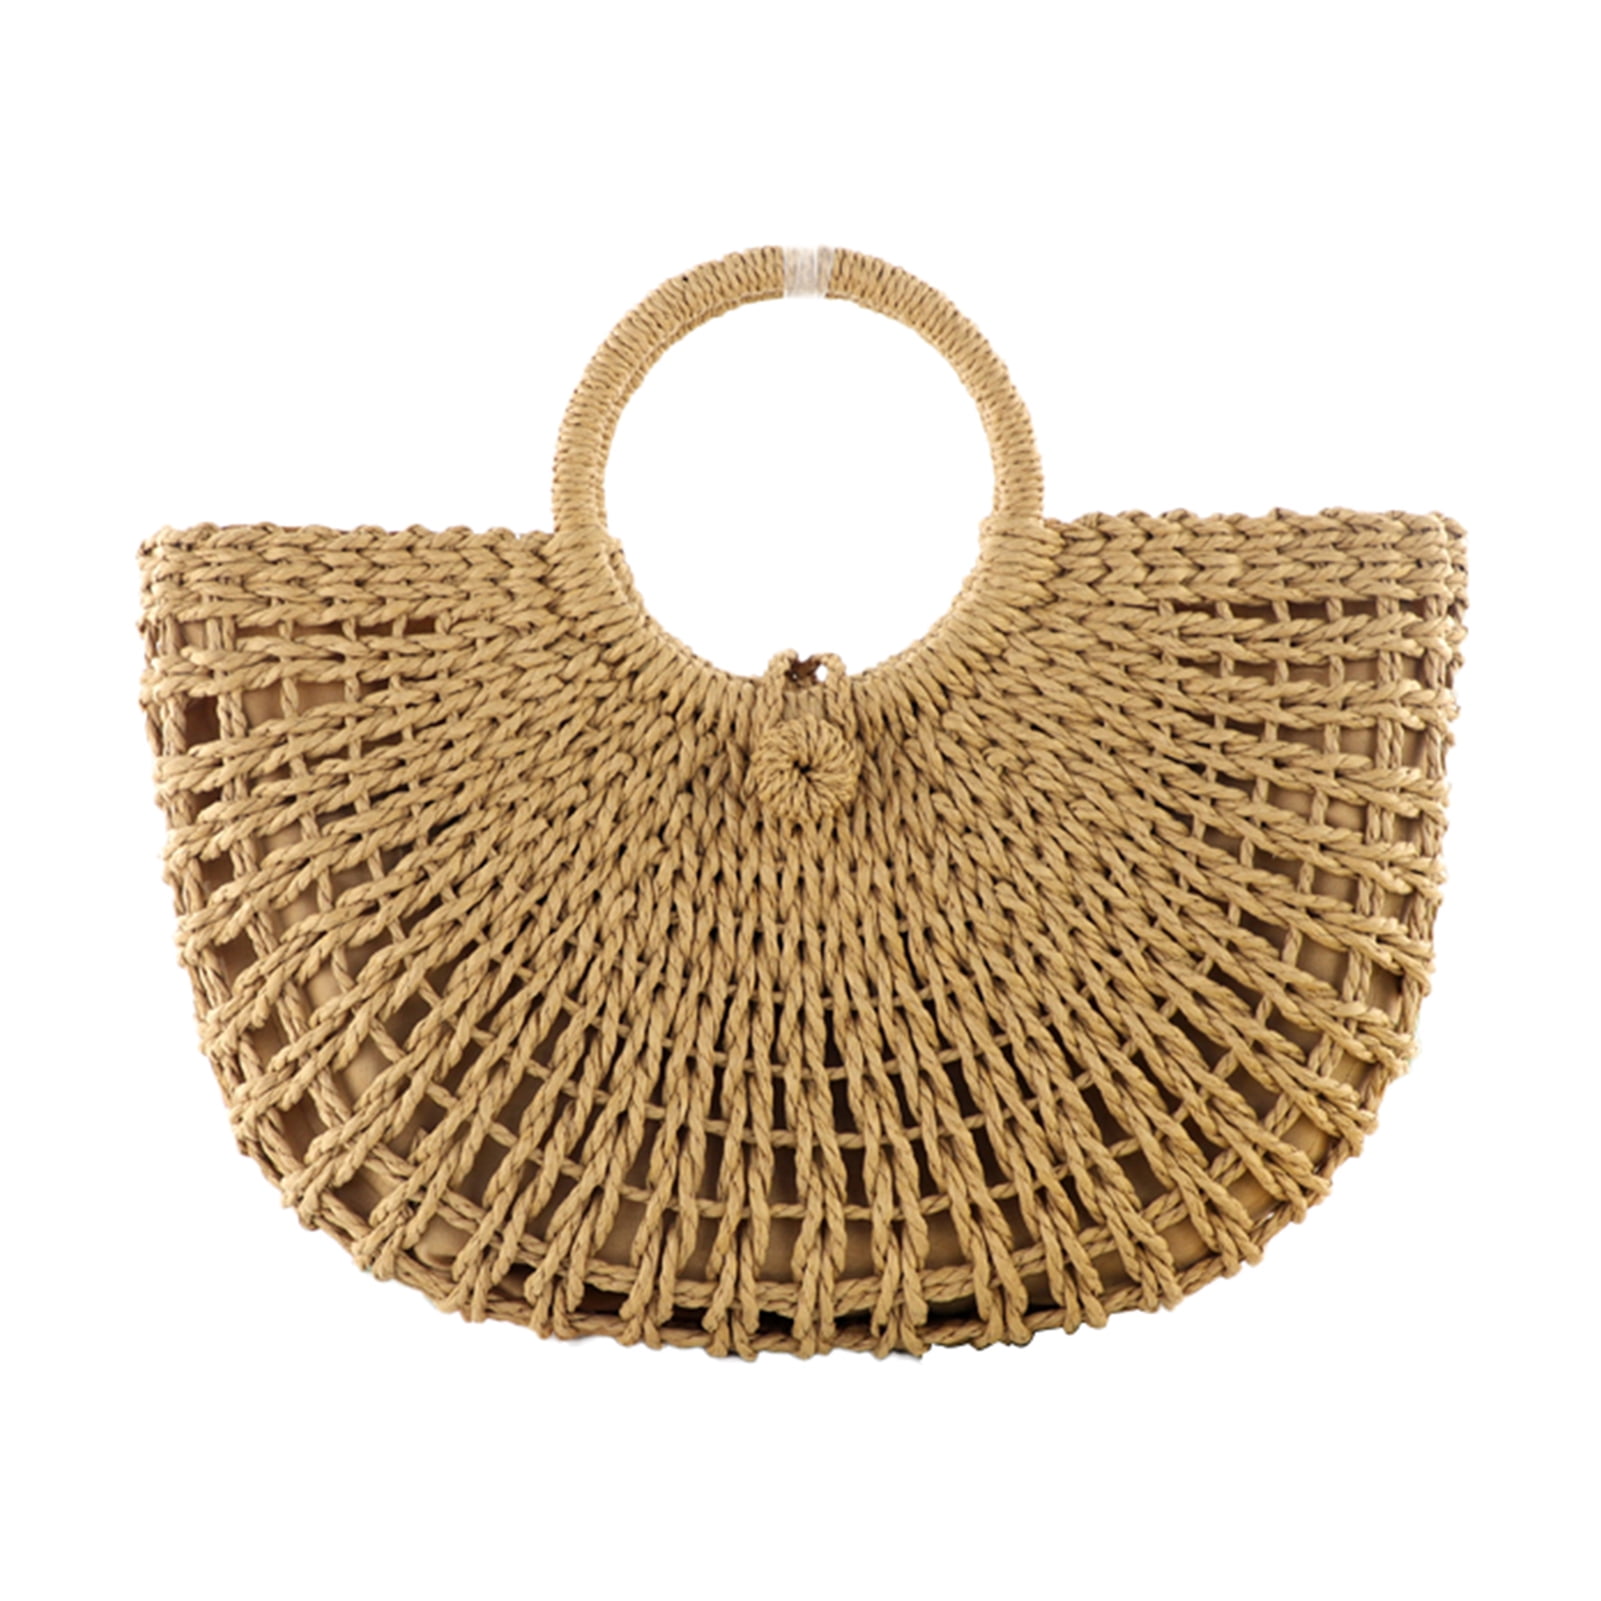 Wholesale SUPERFINDINGS 2Pcs Wooden Round Purse Handle 3.46 inch Round Ring Handbag  Purse Handles Replacement Decorative Handbag Handle for Macrame Bag Straw  Bag Crocheted Purse Making 